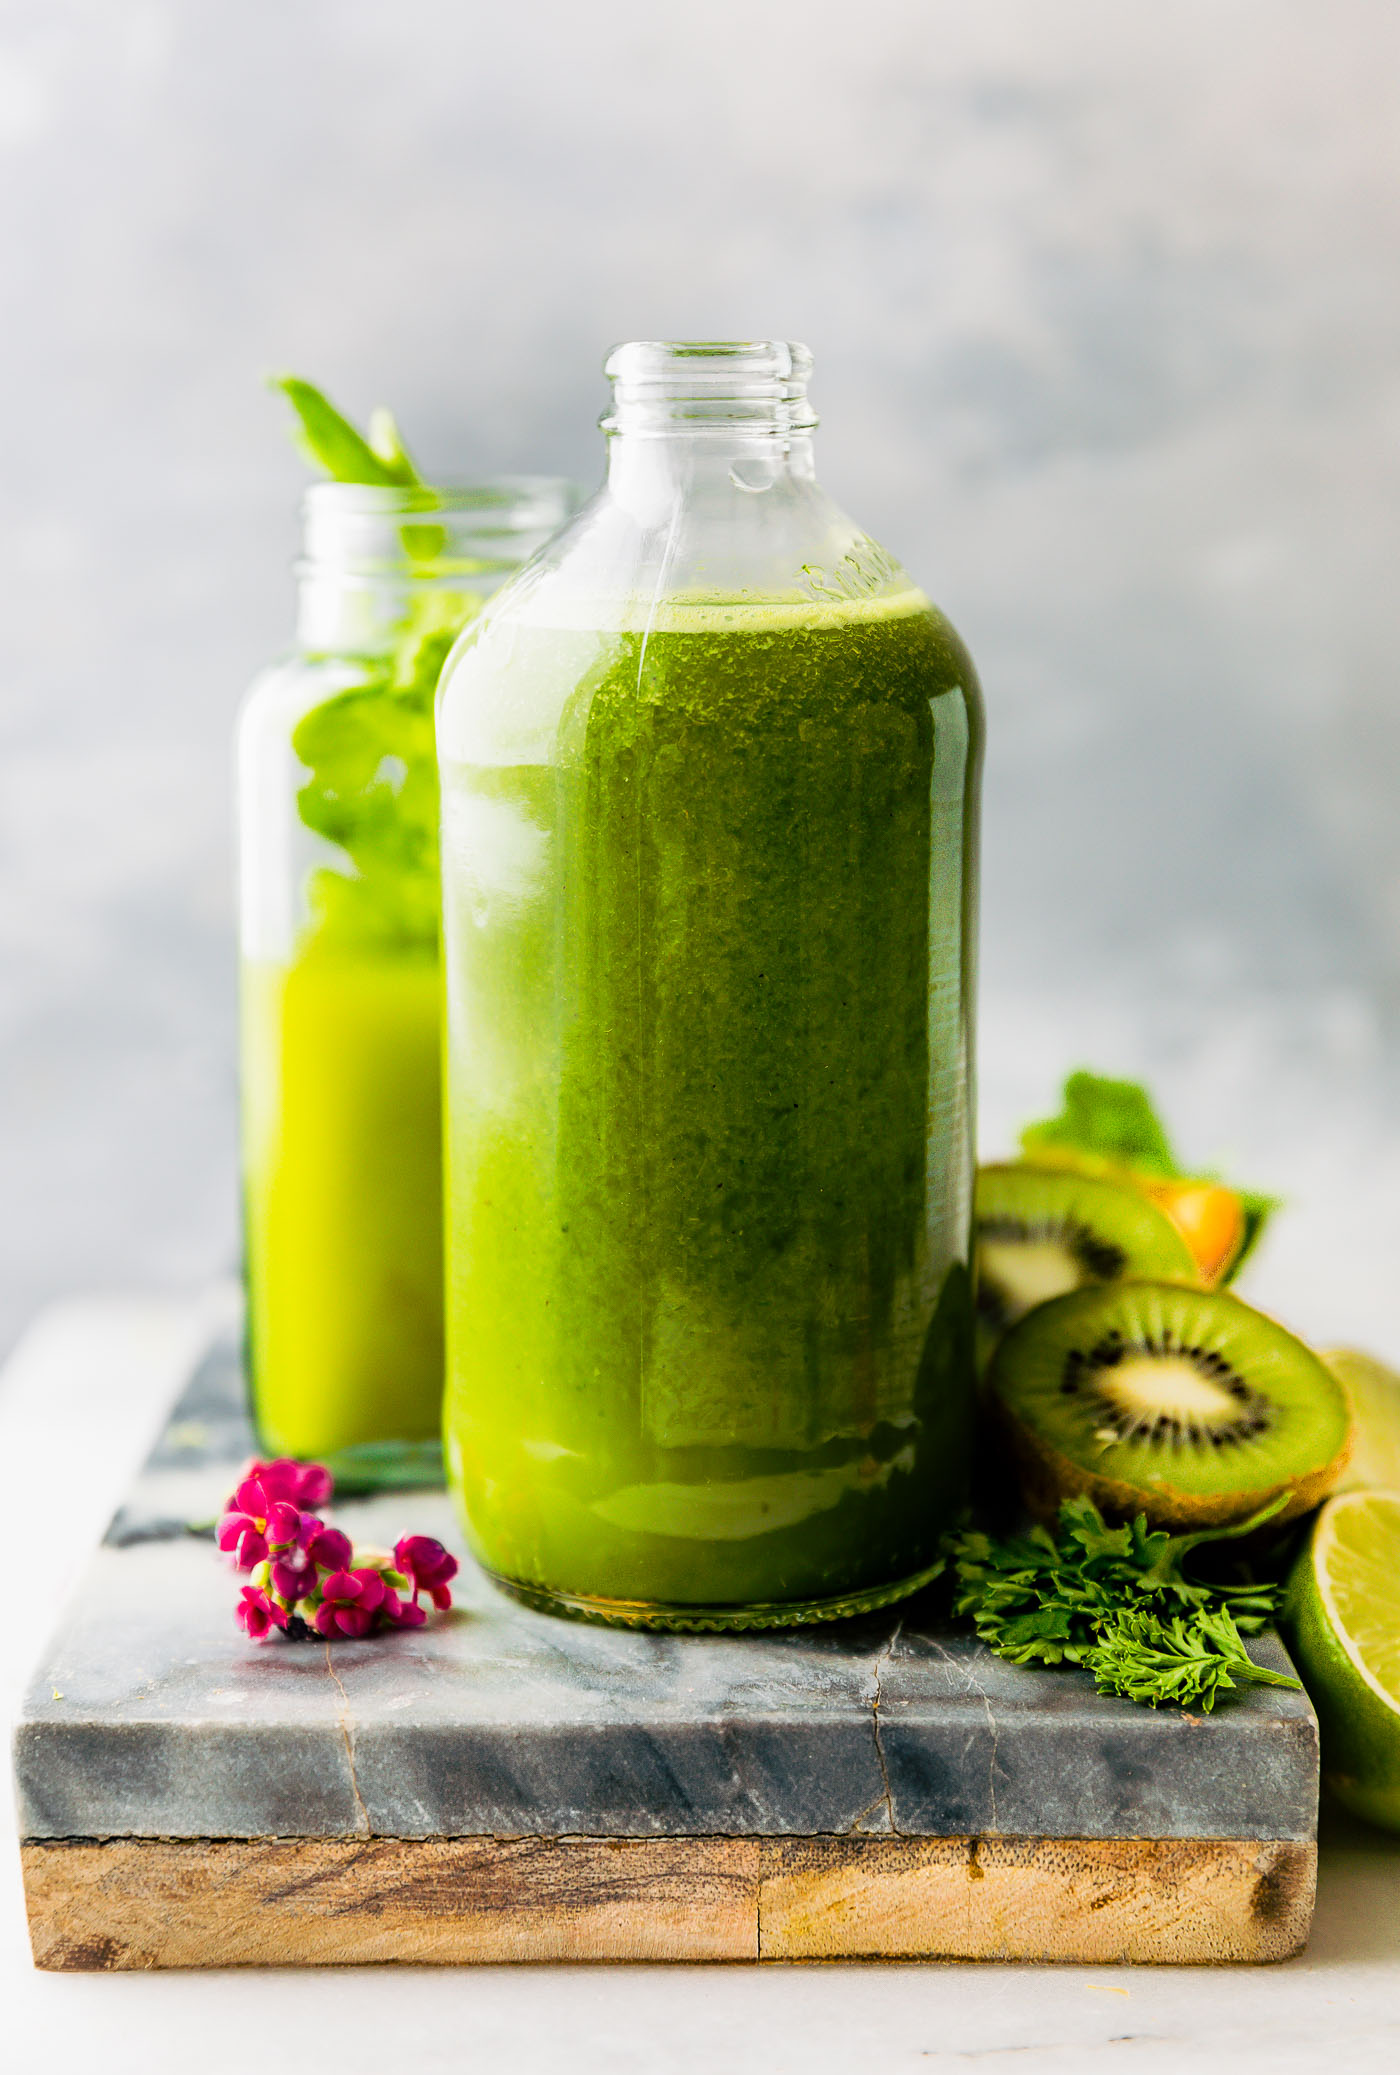 A green smoothie in tall glass bottle on wooden cutting board with cut kiwi on side.